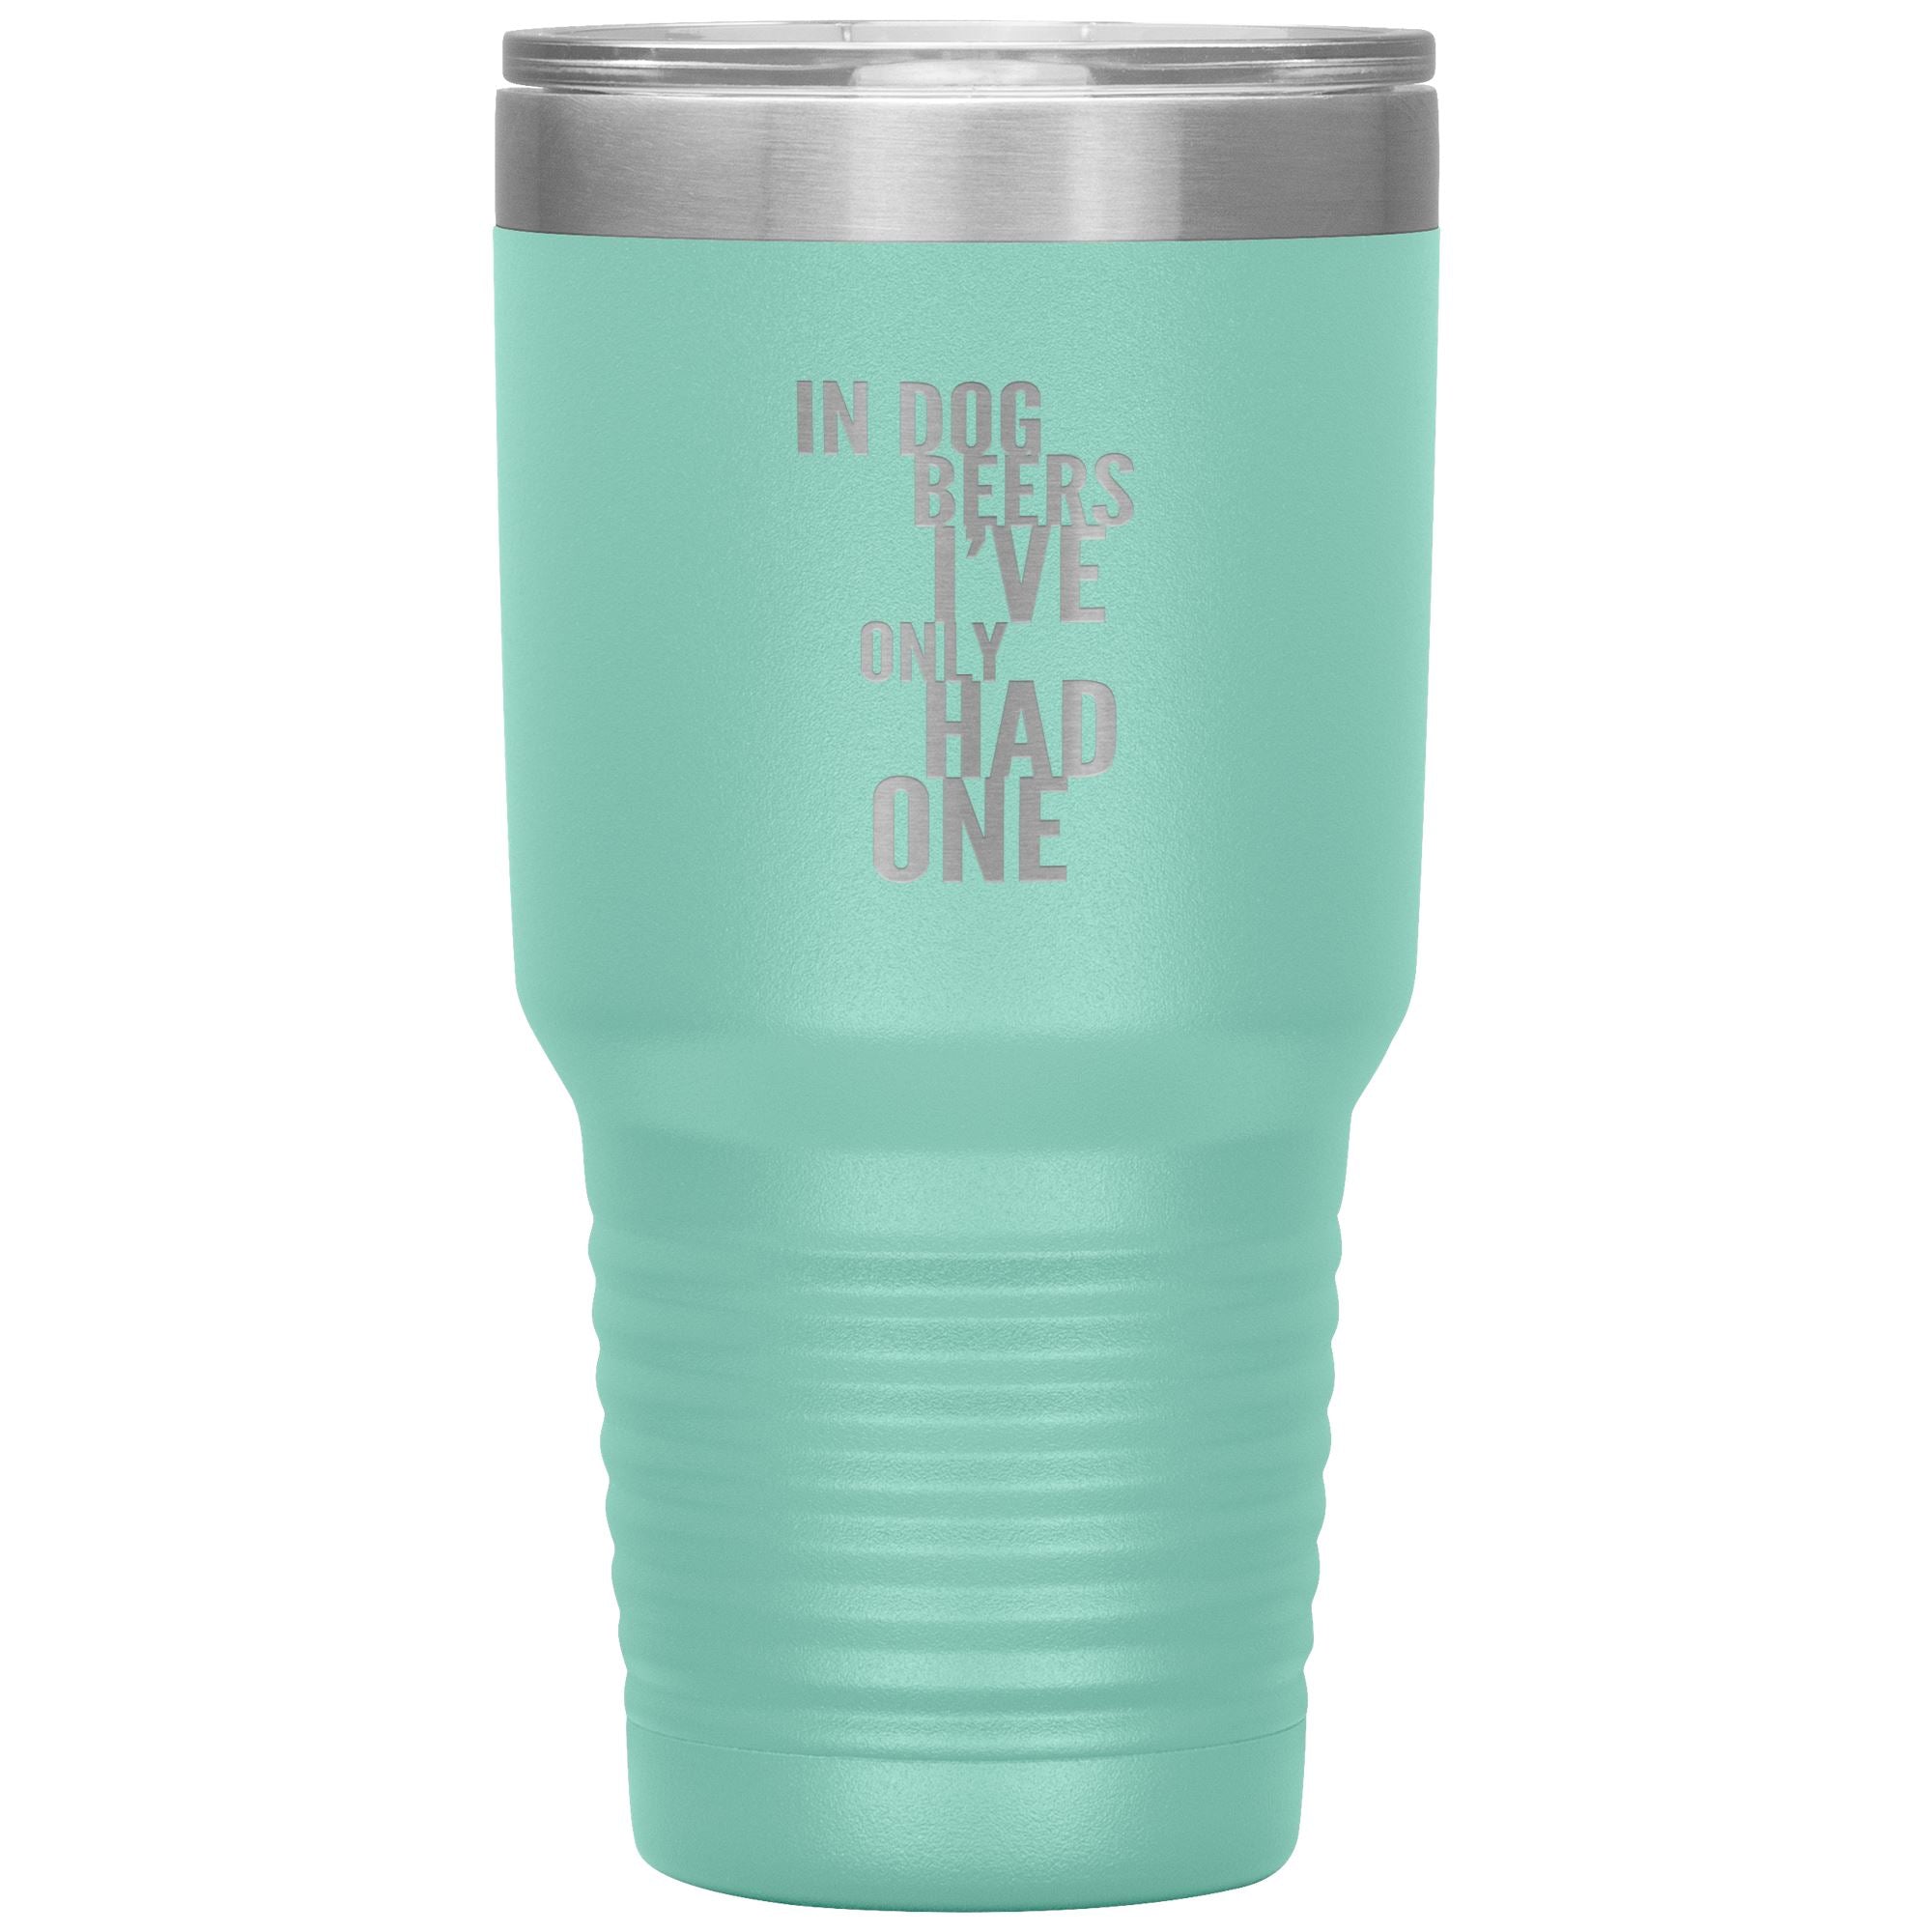 In Dog Beers I've Only Had One 30oz Tumbler Tumblers Teal 